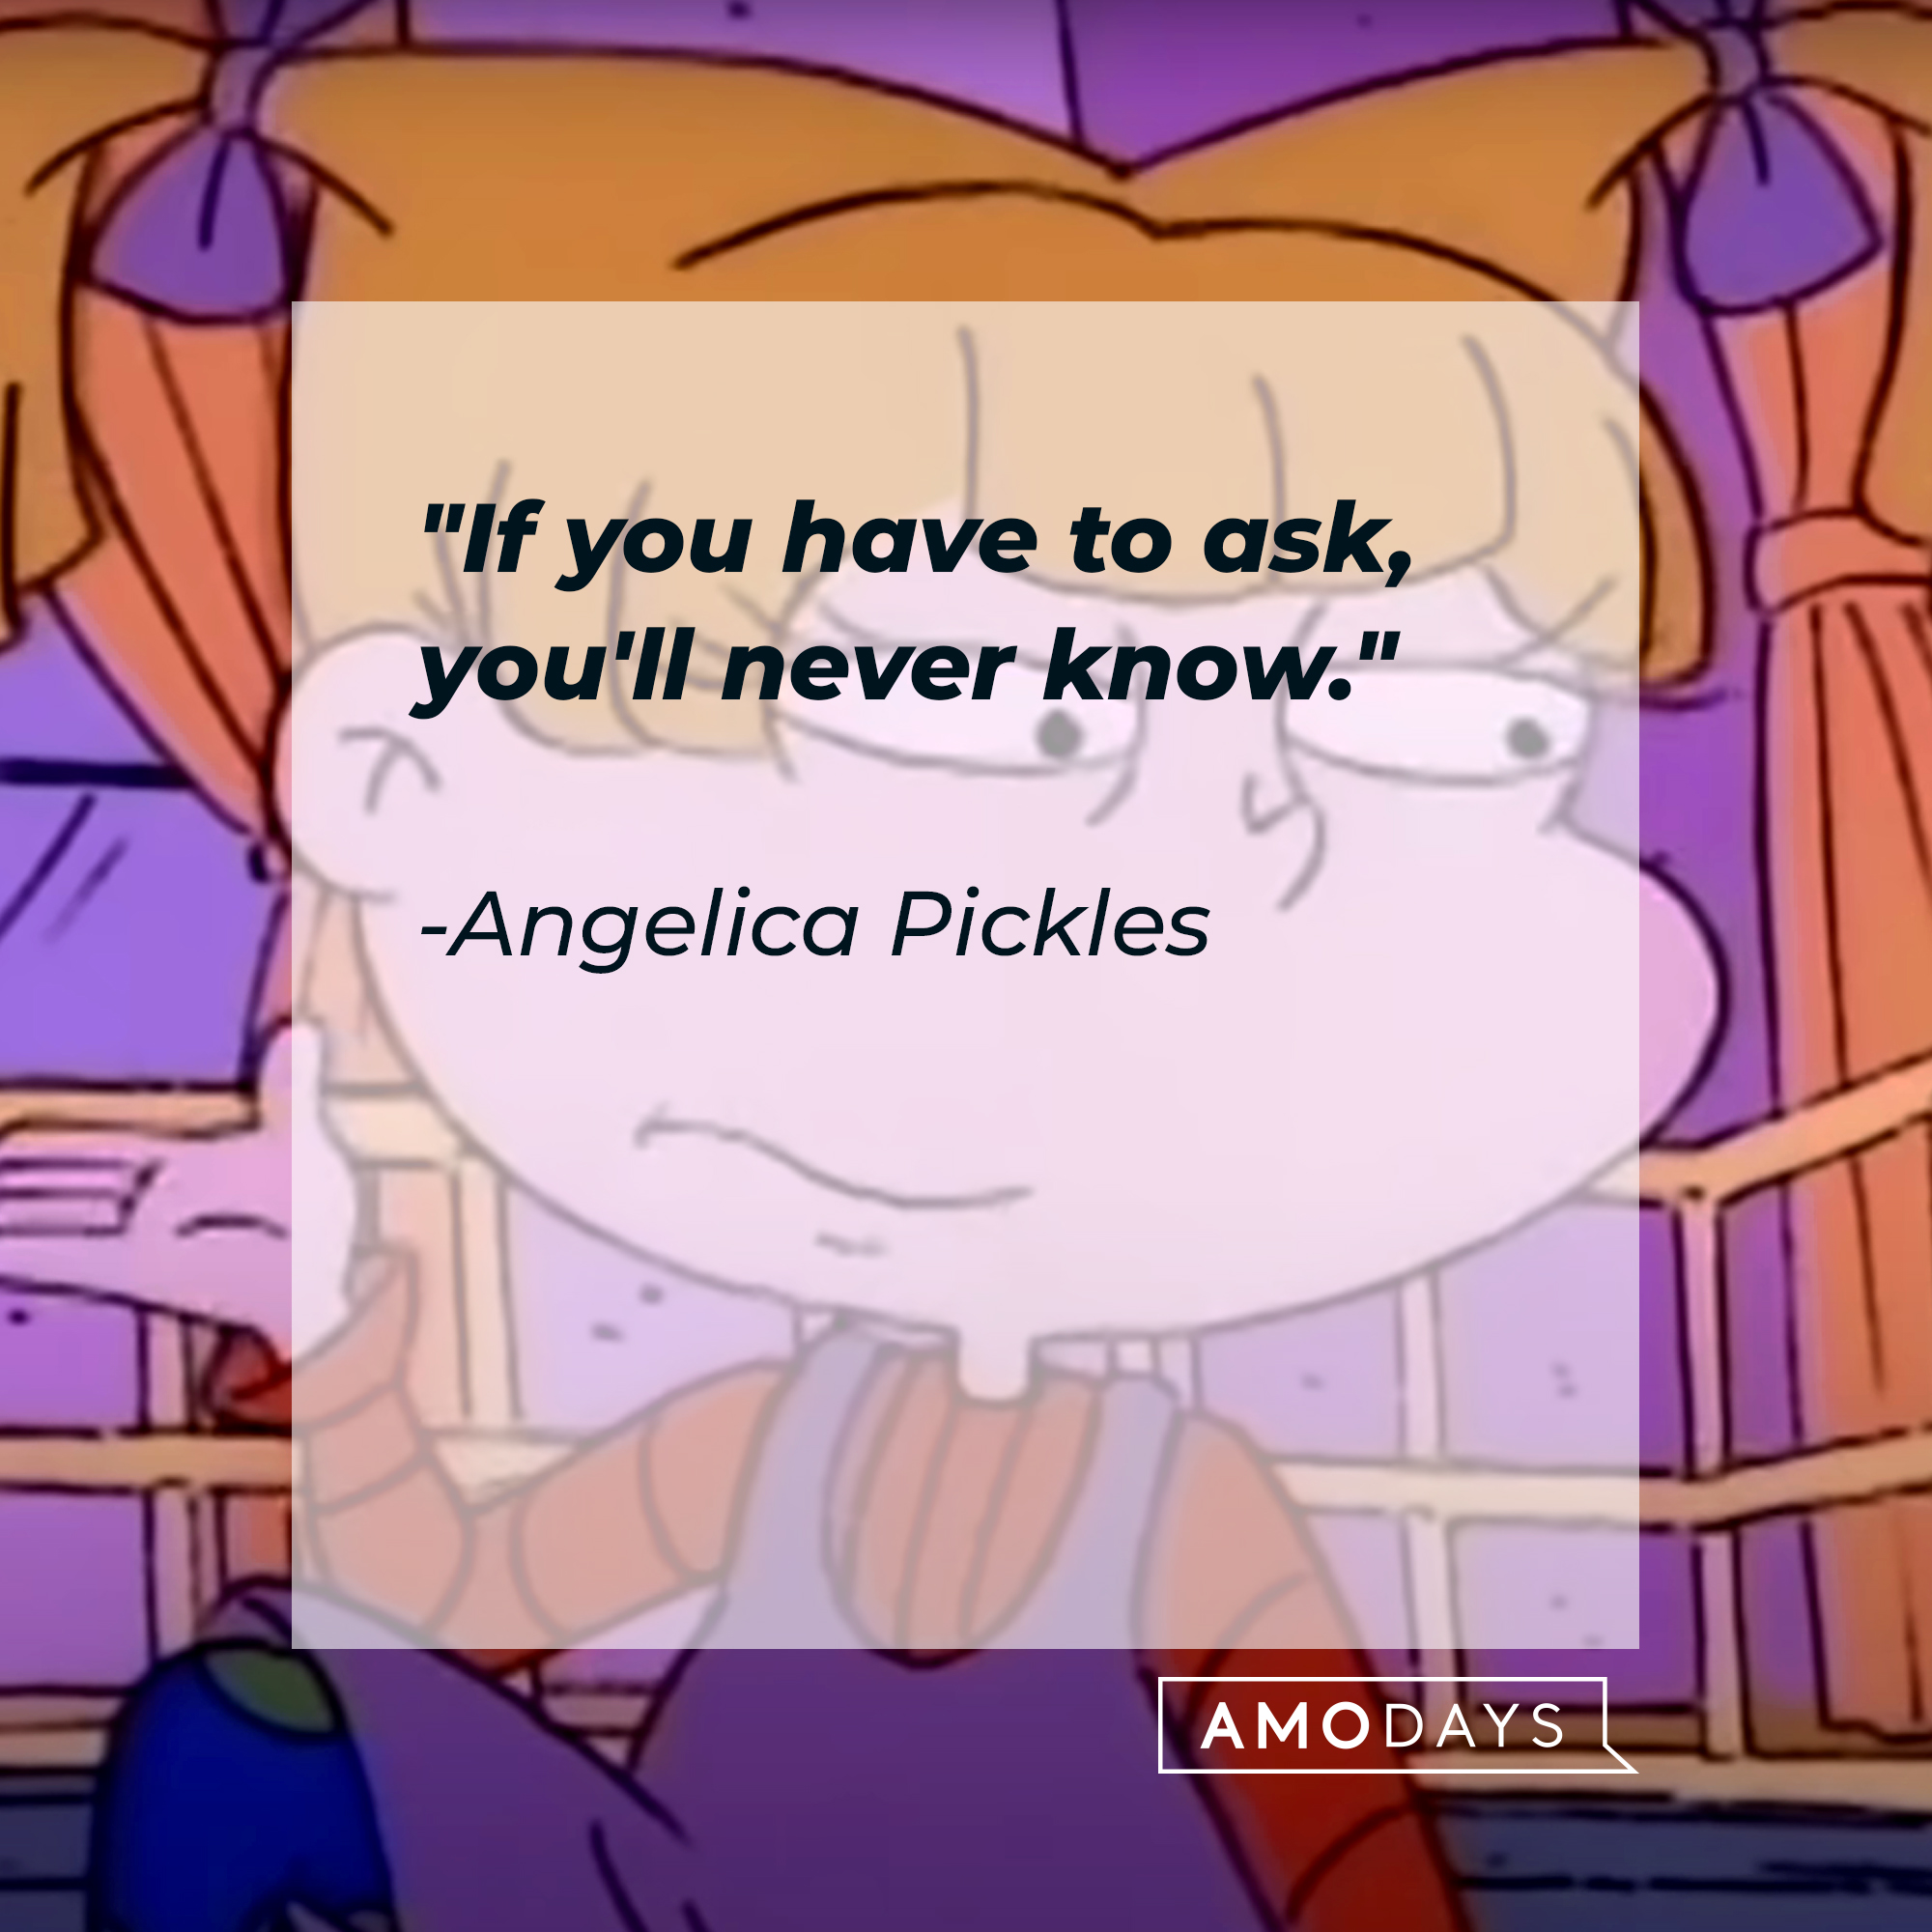 Angelica Pickles’ quote: "If you have to ask, you'll never know." | Source: Facebook/Rugrats